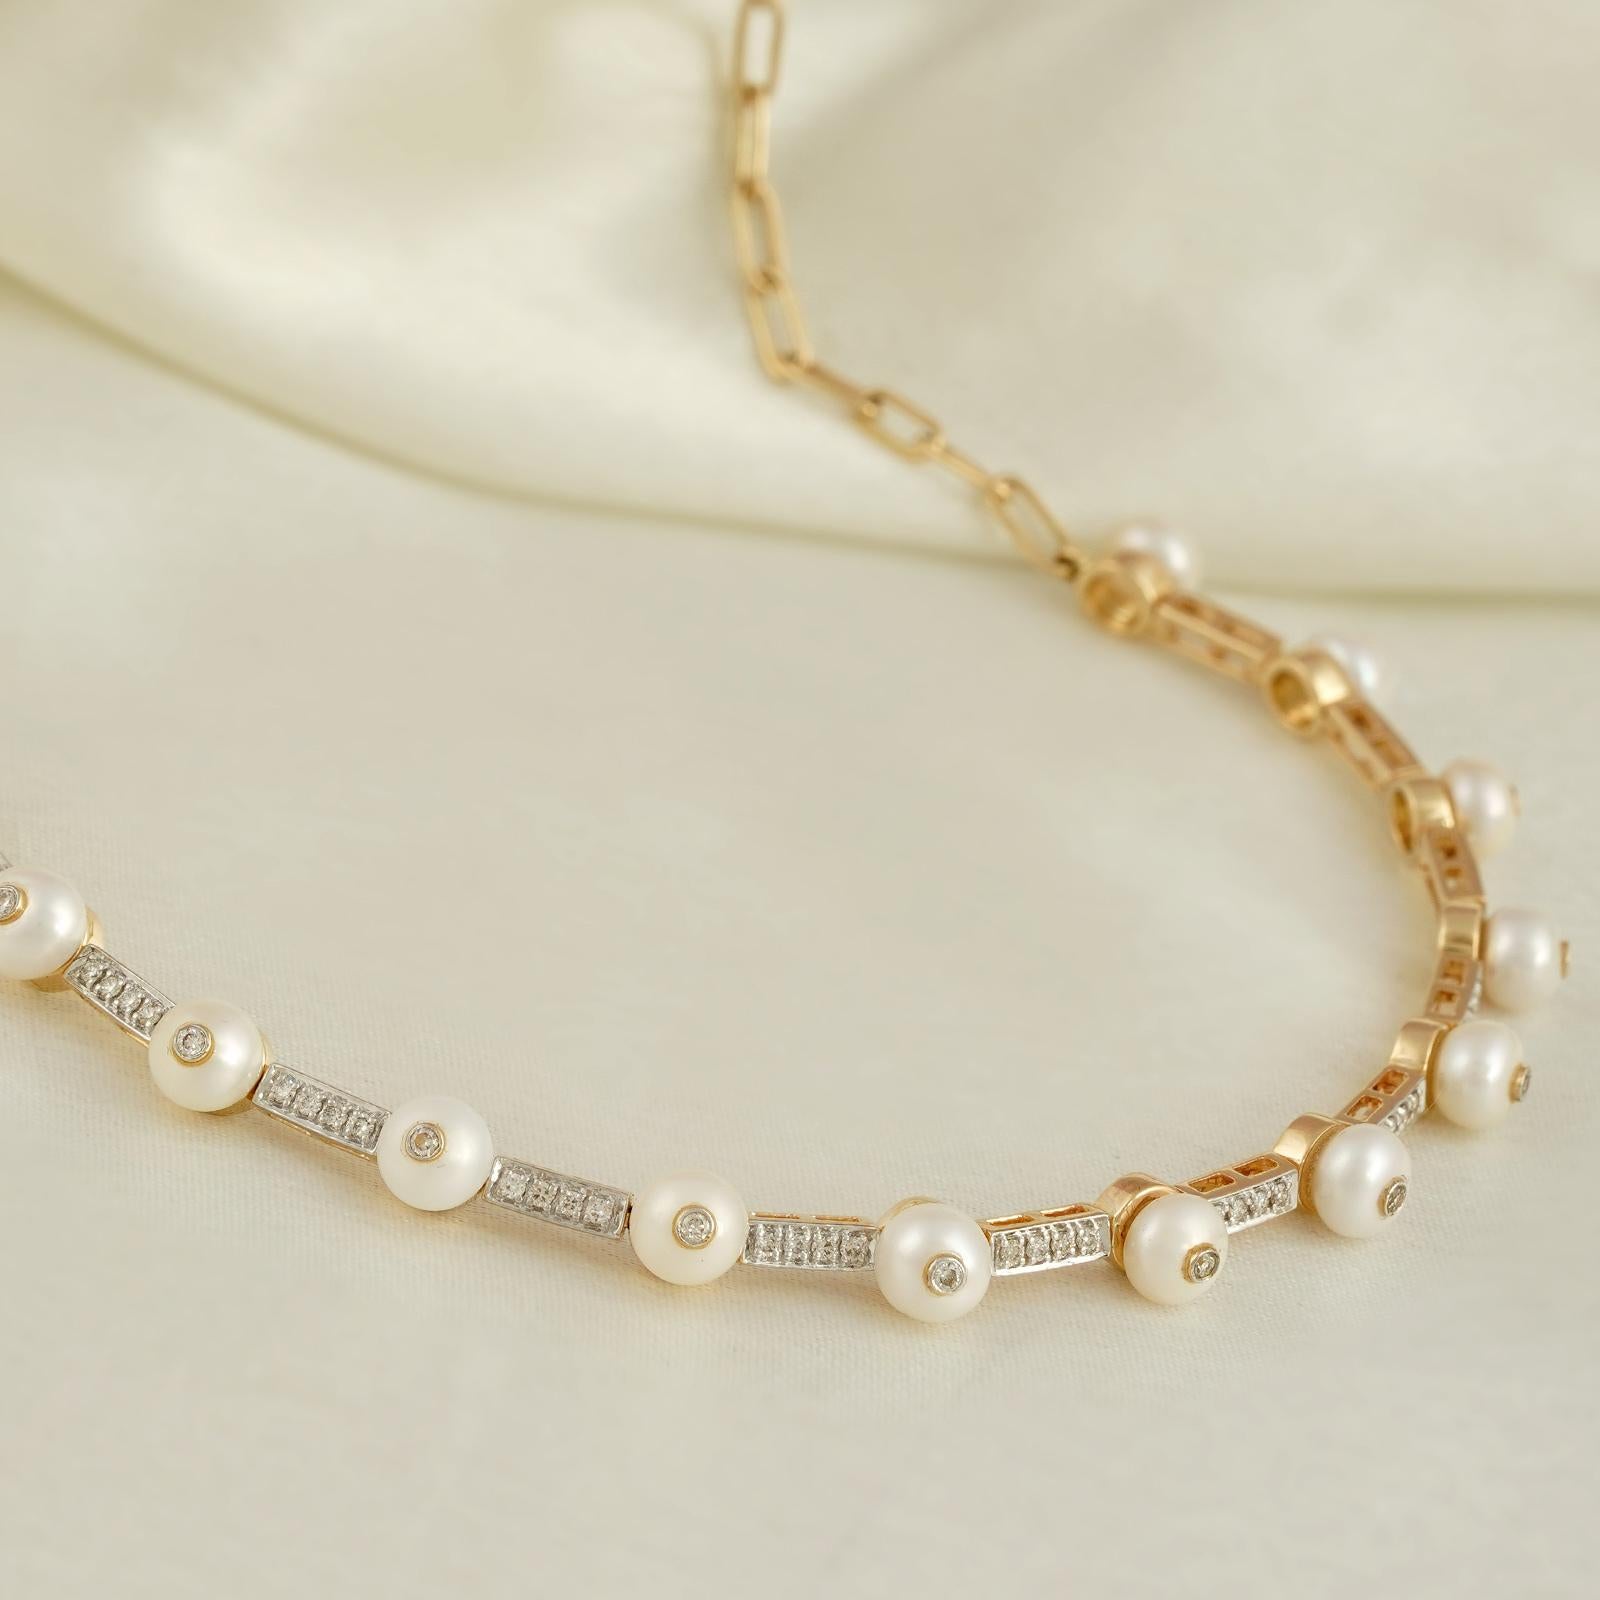 Gold(14K) : 17.08g 
Diamonds : (VS clarity & H-I colour) : (Brilliant cut ) : 0.79ct Gemstone : Chinese Cultured Pearl

You cannot go wrong with pearls and diamonds, can you? This necklace here is crafted in gold to sit cozily on the nape of your